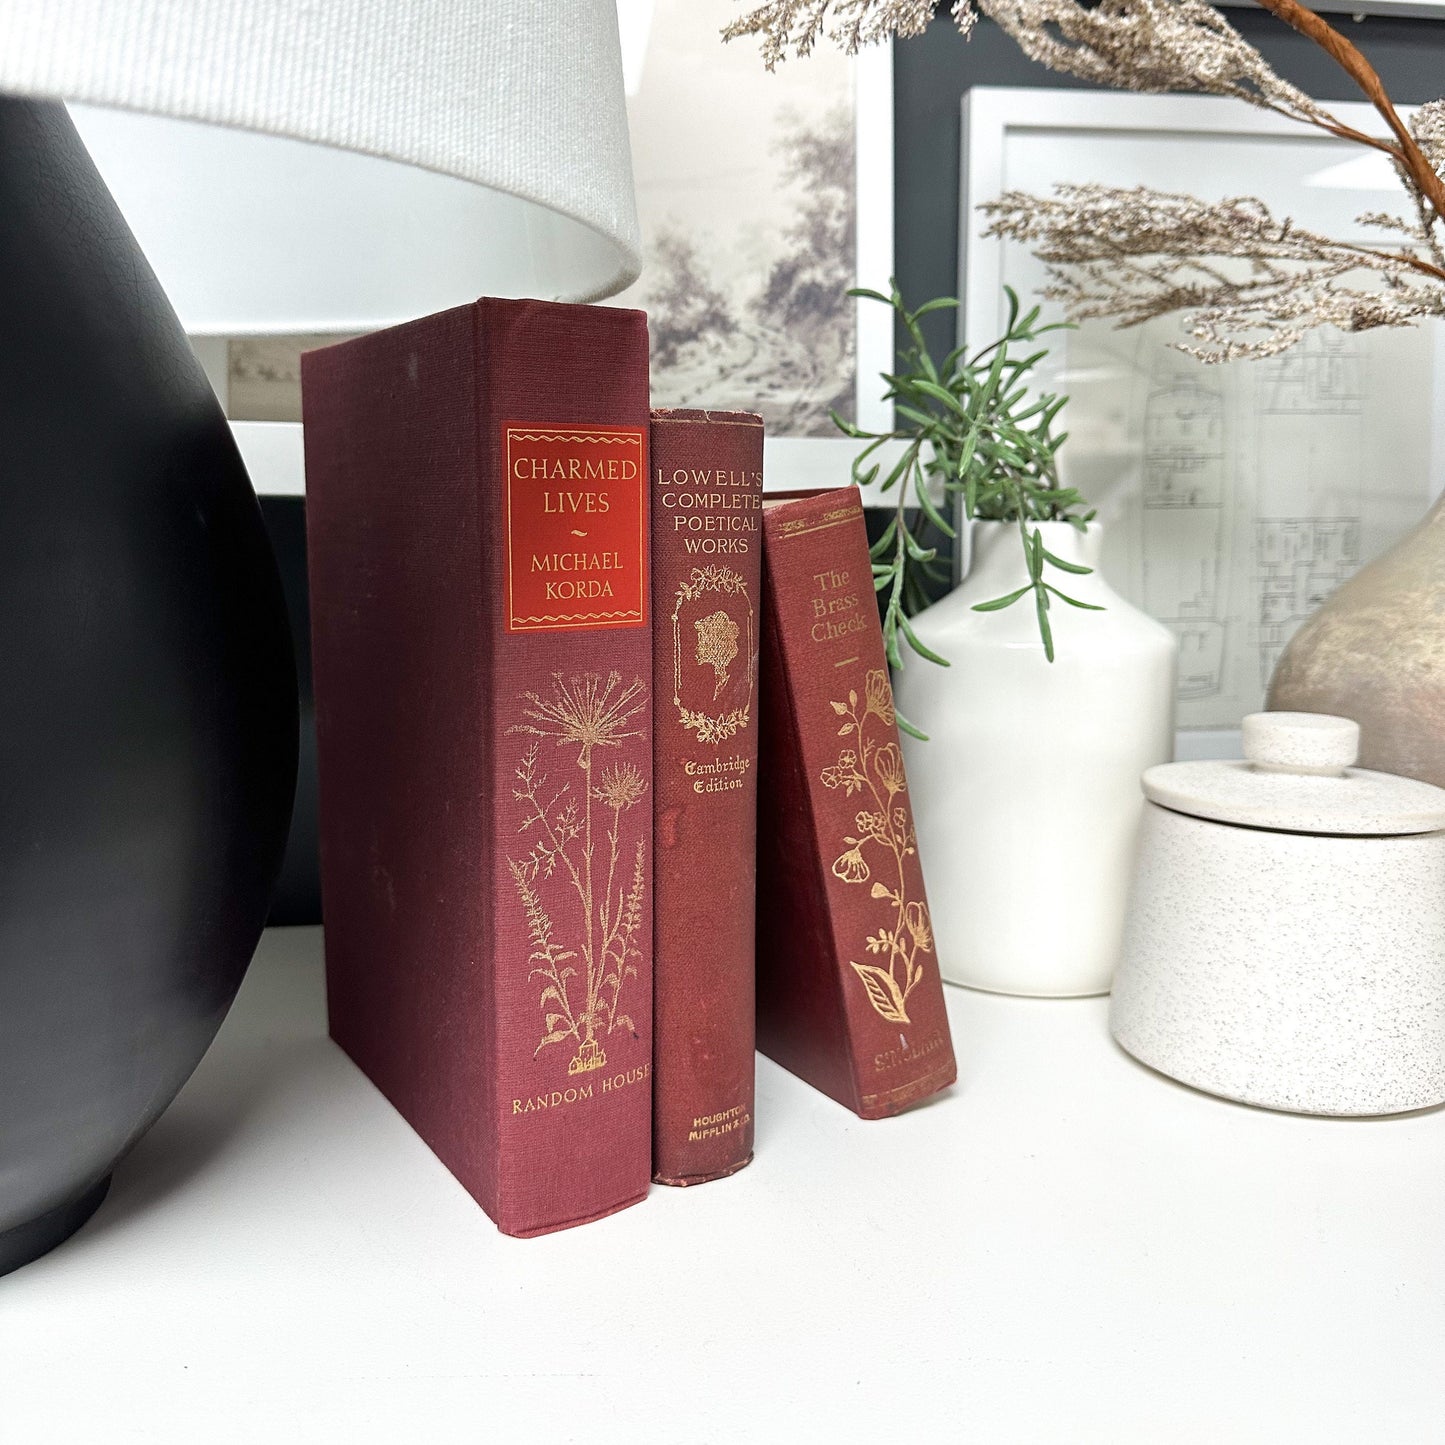 Books for Staging, Red Books for Home Decor, Living Room Decor